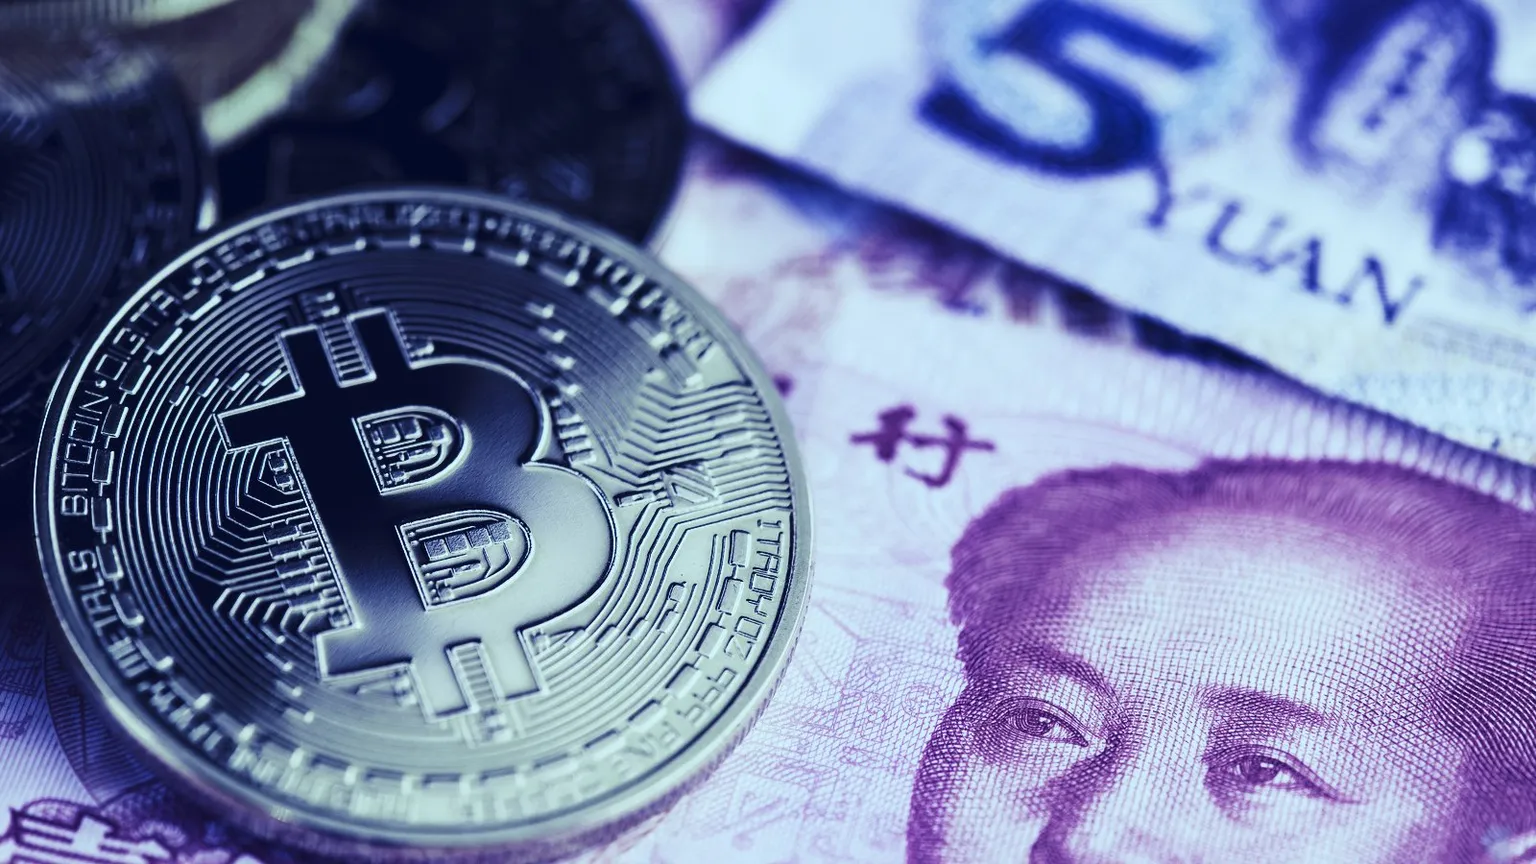 China and Bitcoin; oil and water? Image: Shutterstock.